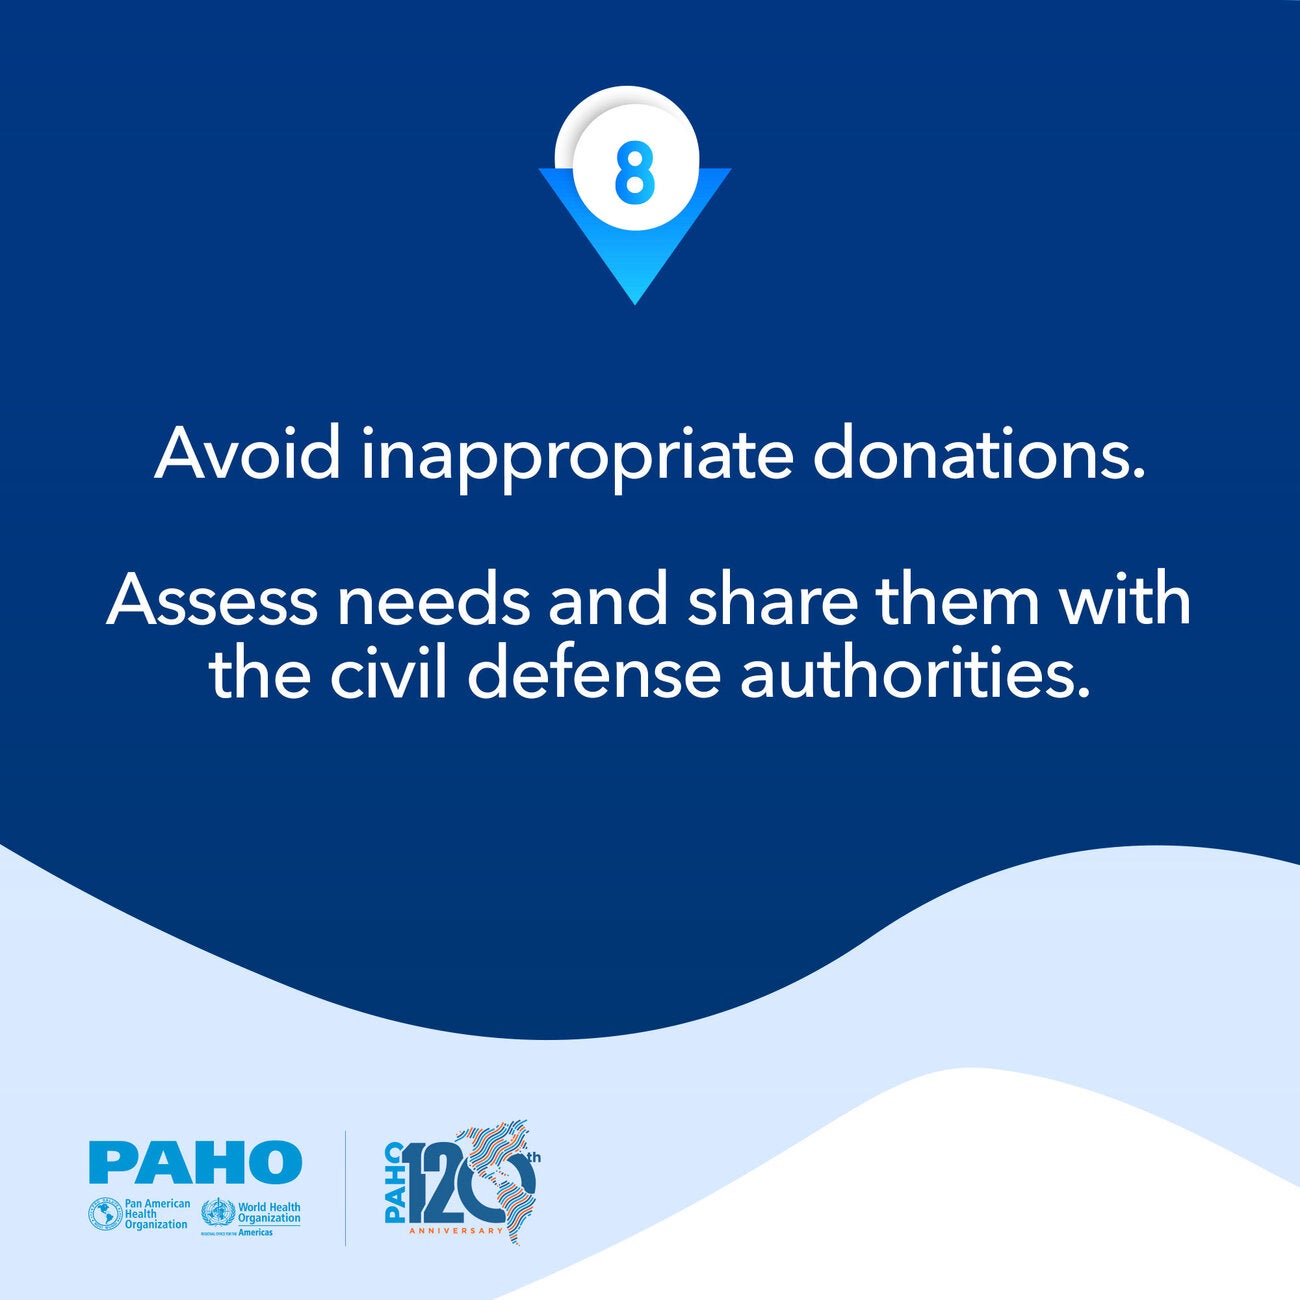 Avoid inappropriate donations. Assess needs and share them with the civil defense authorities.